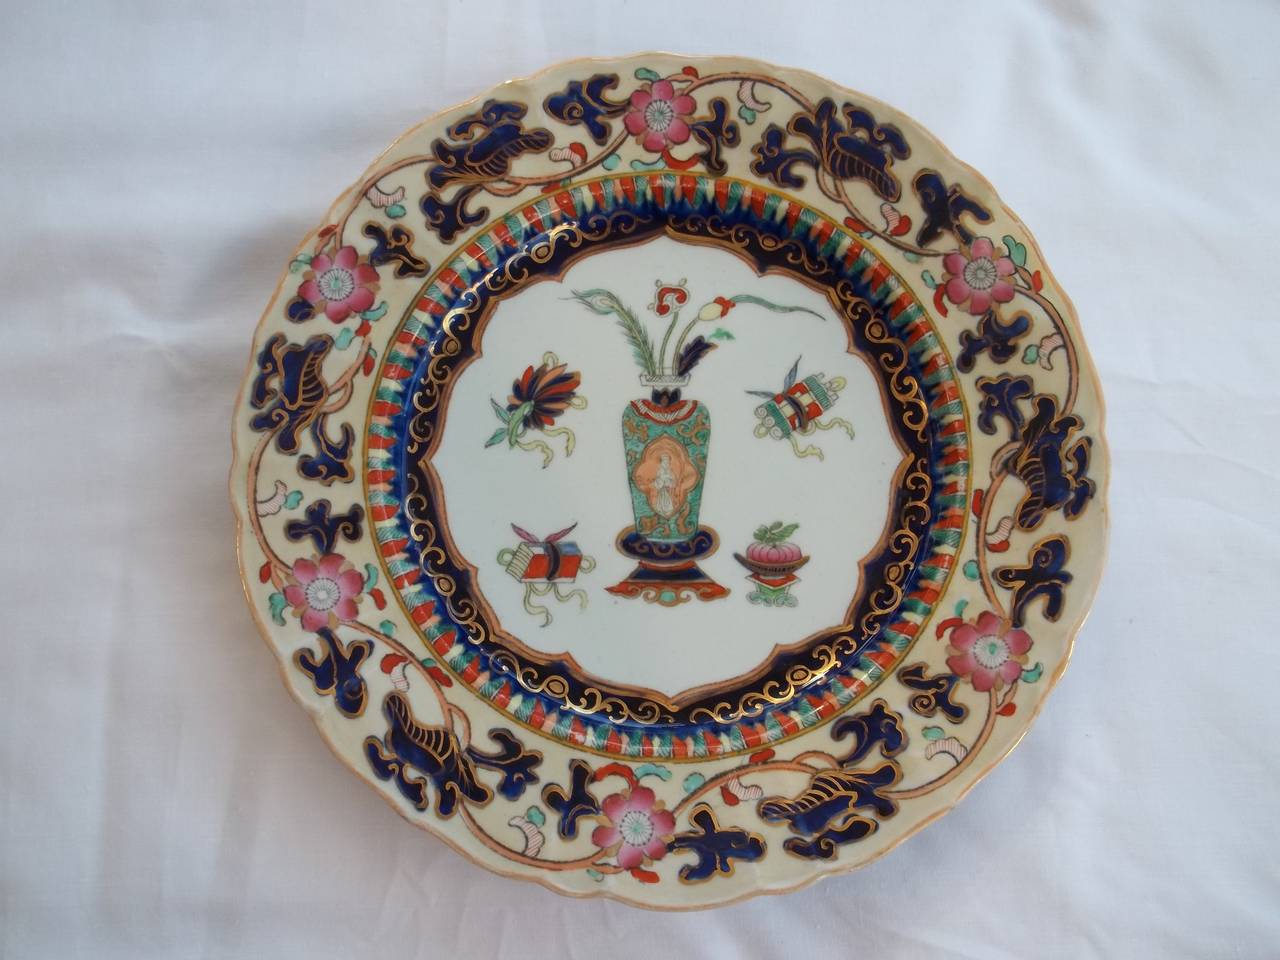 This is a good pair of Ironstone dinner plates made by Mason's Ironstone, Lane Delph, England, circa 1840. We have priced these plates individually.

The plates are beautifully and boldly decorated in the Chinese Antiquities pattern, sometimes